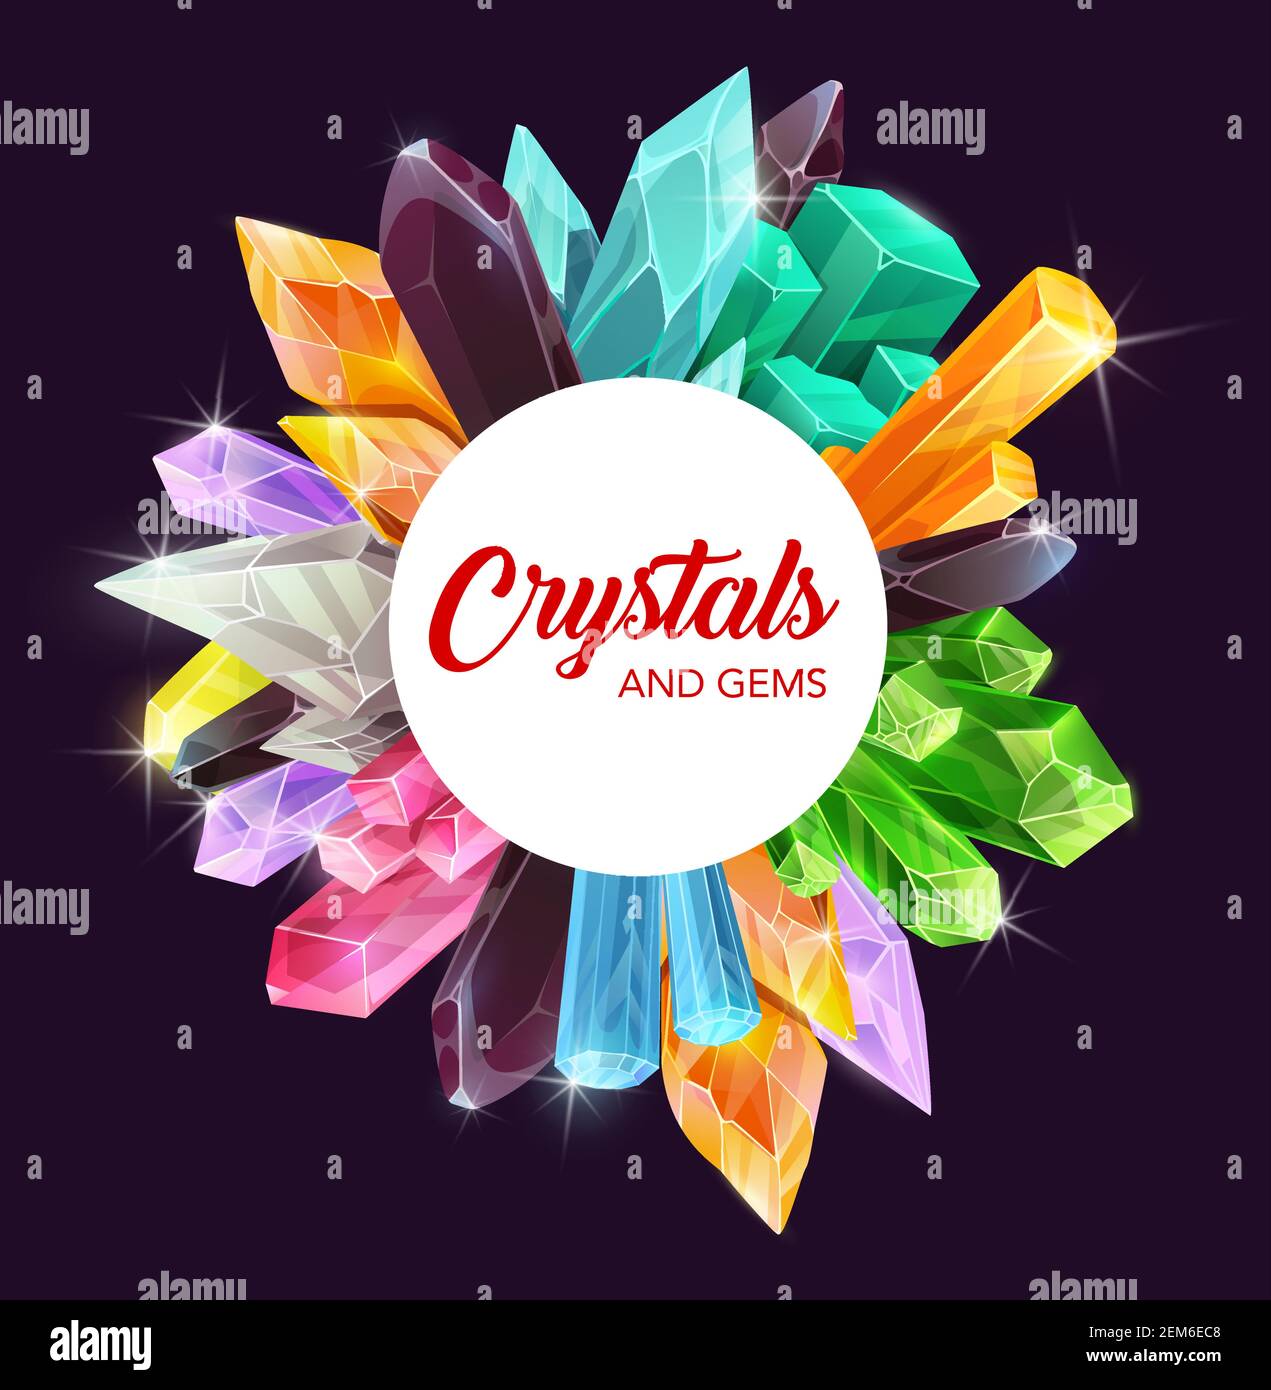 Crystals, gem stones and mineral rocks with precious gemstones of diamond, amethyst and sapphire vector design. Pink, green and blue quartz, opal, gla Stock Vector